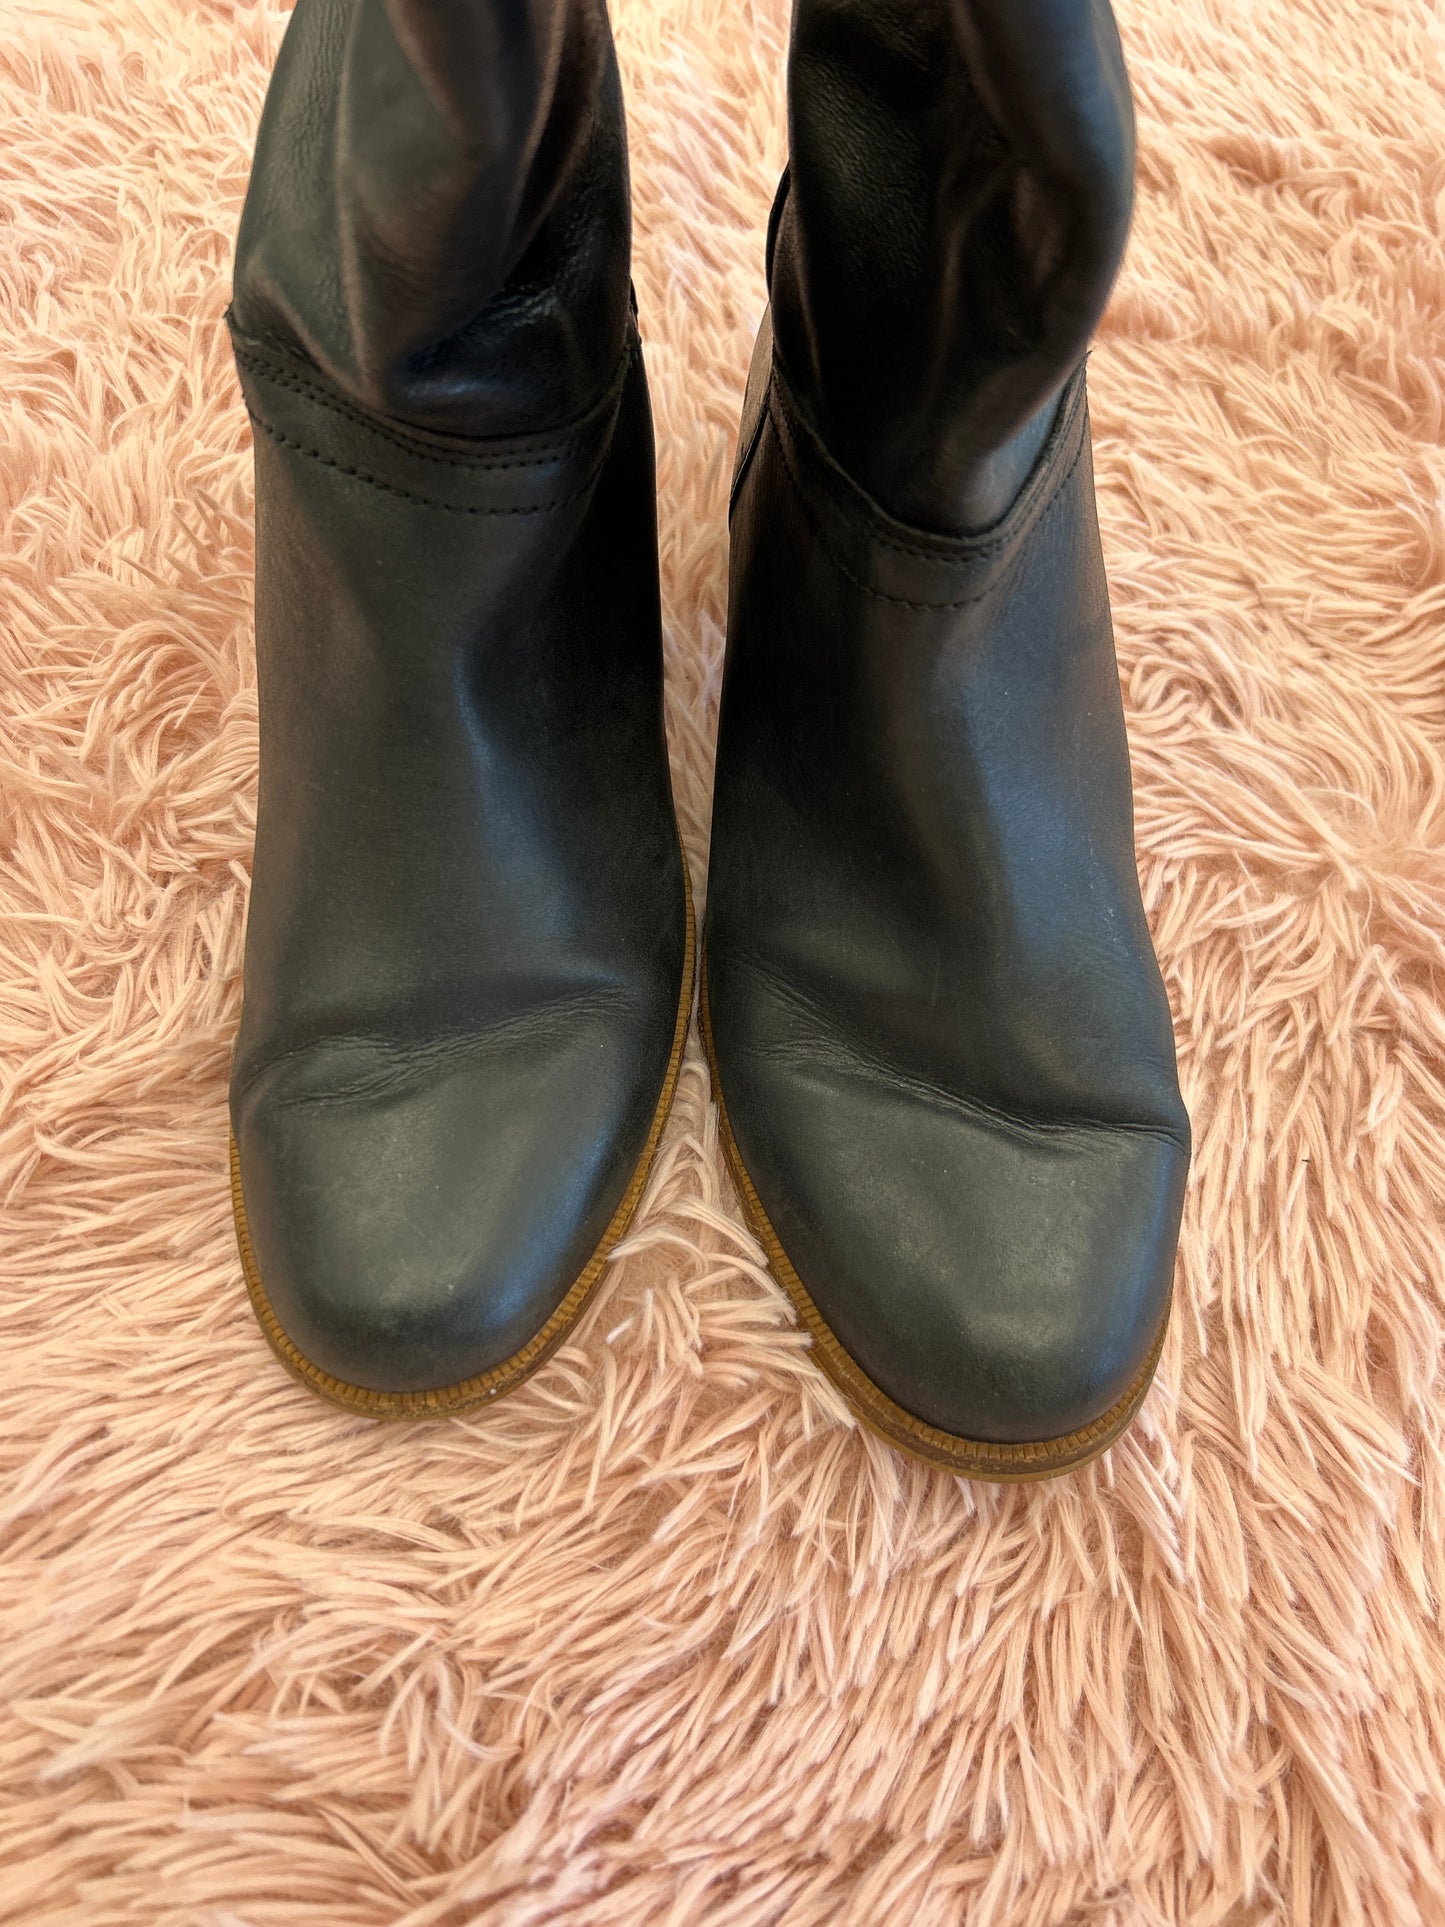 Boots Knee Heels By Ugg  Size: 8.5